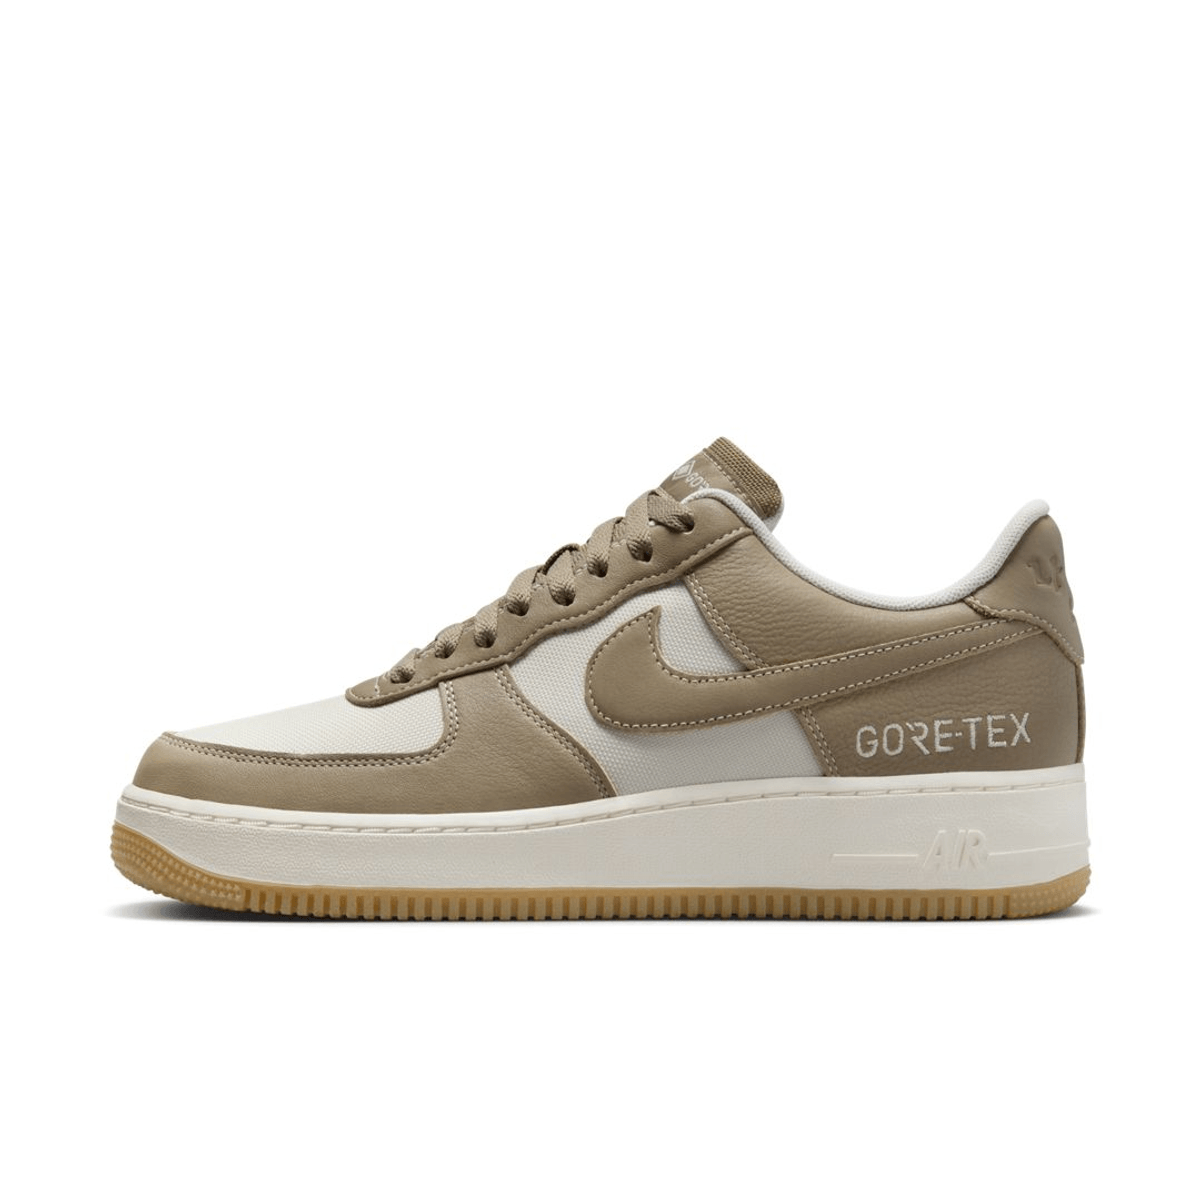 Celebrate Hangul Day With The Nike Air Force 1 Low Gore-Tex